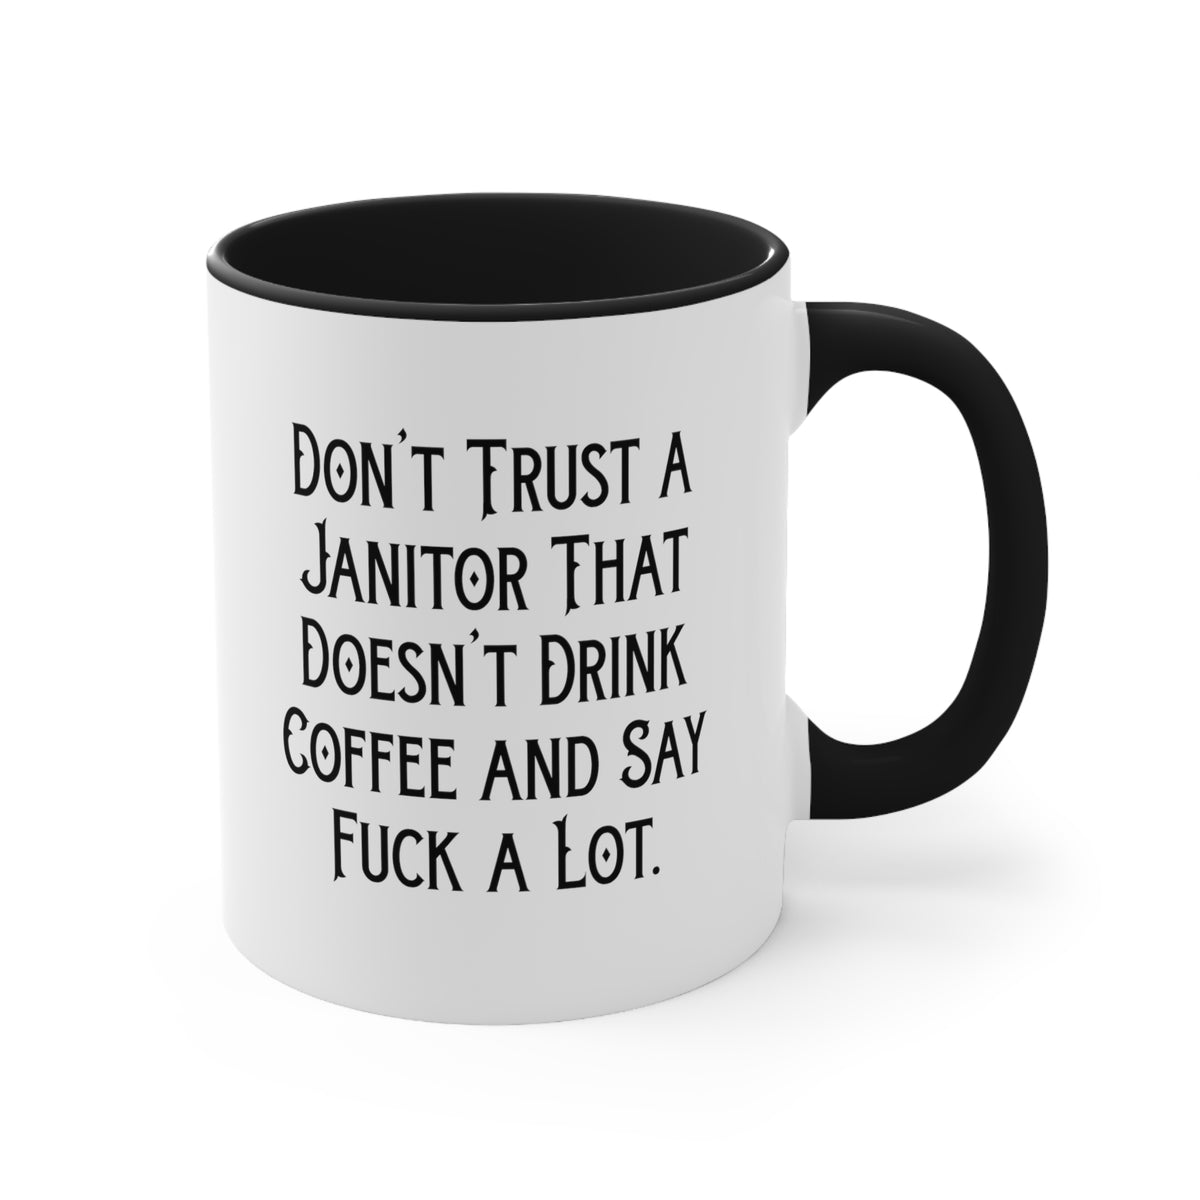 Sarcastic Janitor Two Tone 11oz Mug, Don't Trust a Janitor That Doesn, New Gifts for Coworkers from Coworkers, Graduation Gifts, Funny janitor gift ideas, Funny gifts for janitors, Janitor gift